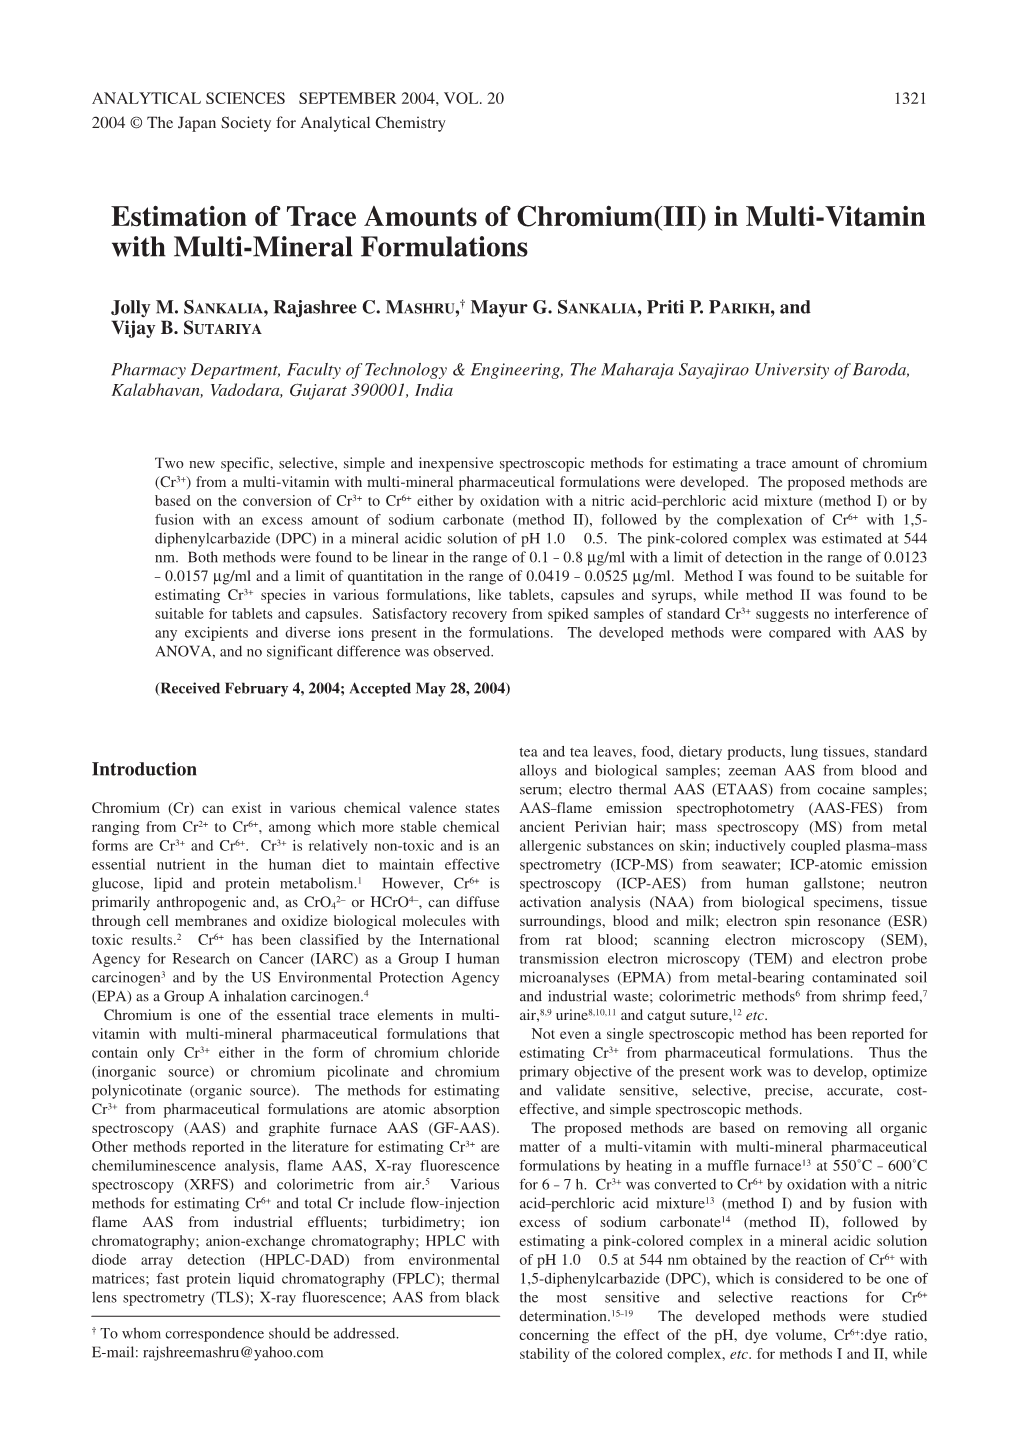 Estimation of Trace Amounts of Chromium (III) in Multi-Vitamin With